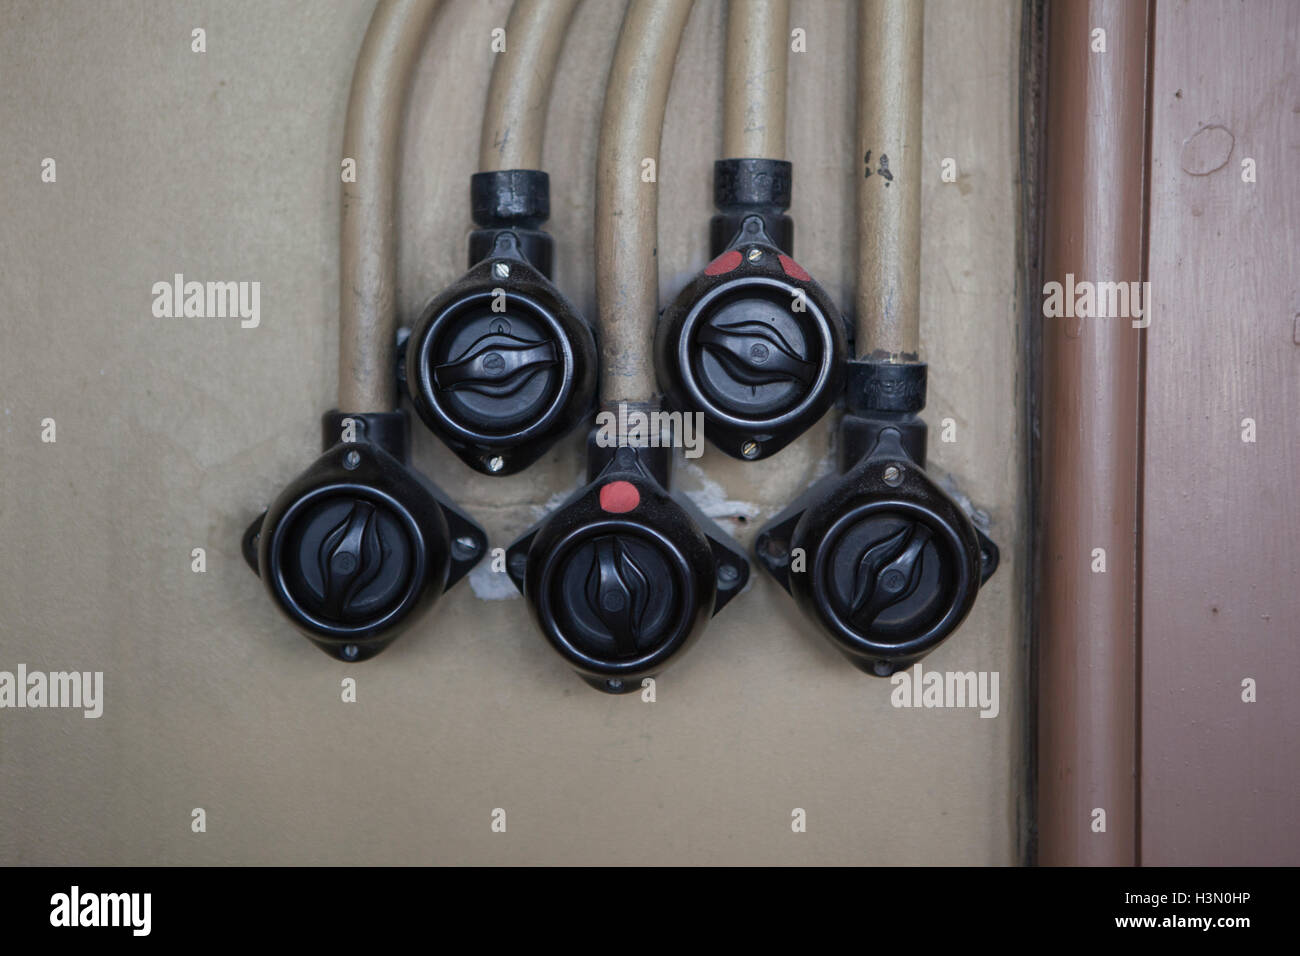 Power switch with wires on wall. Stock Photo